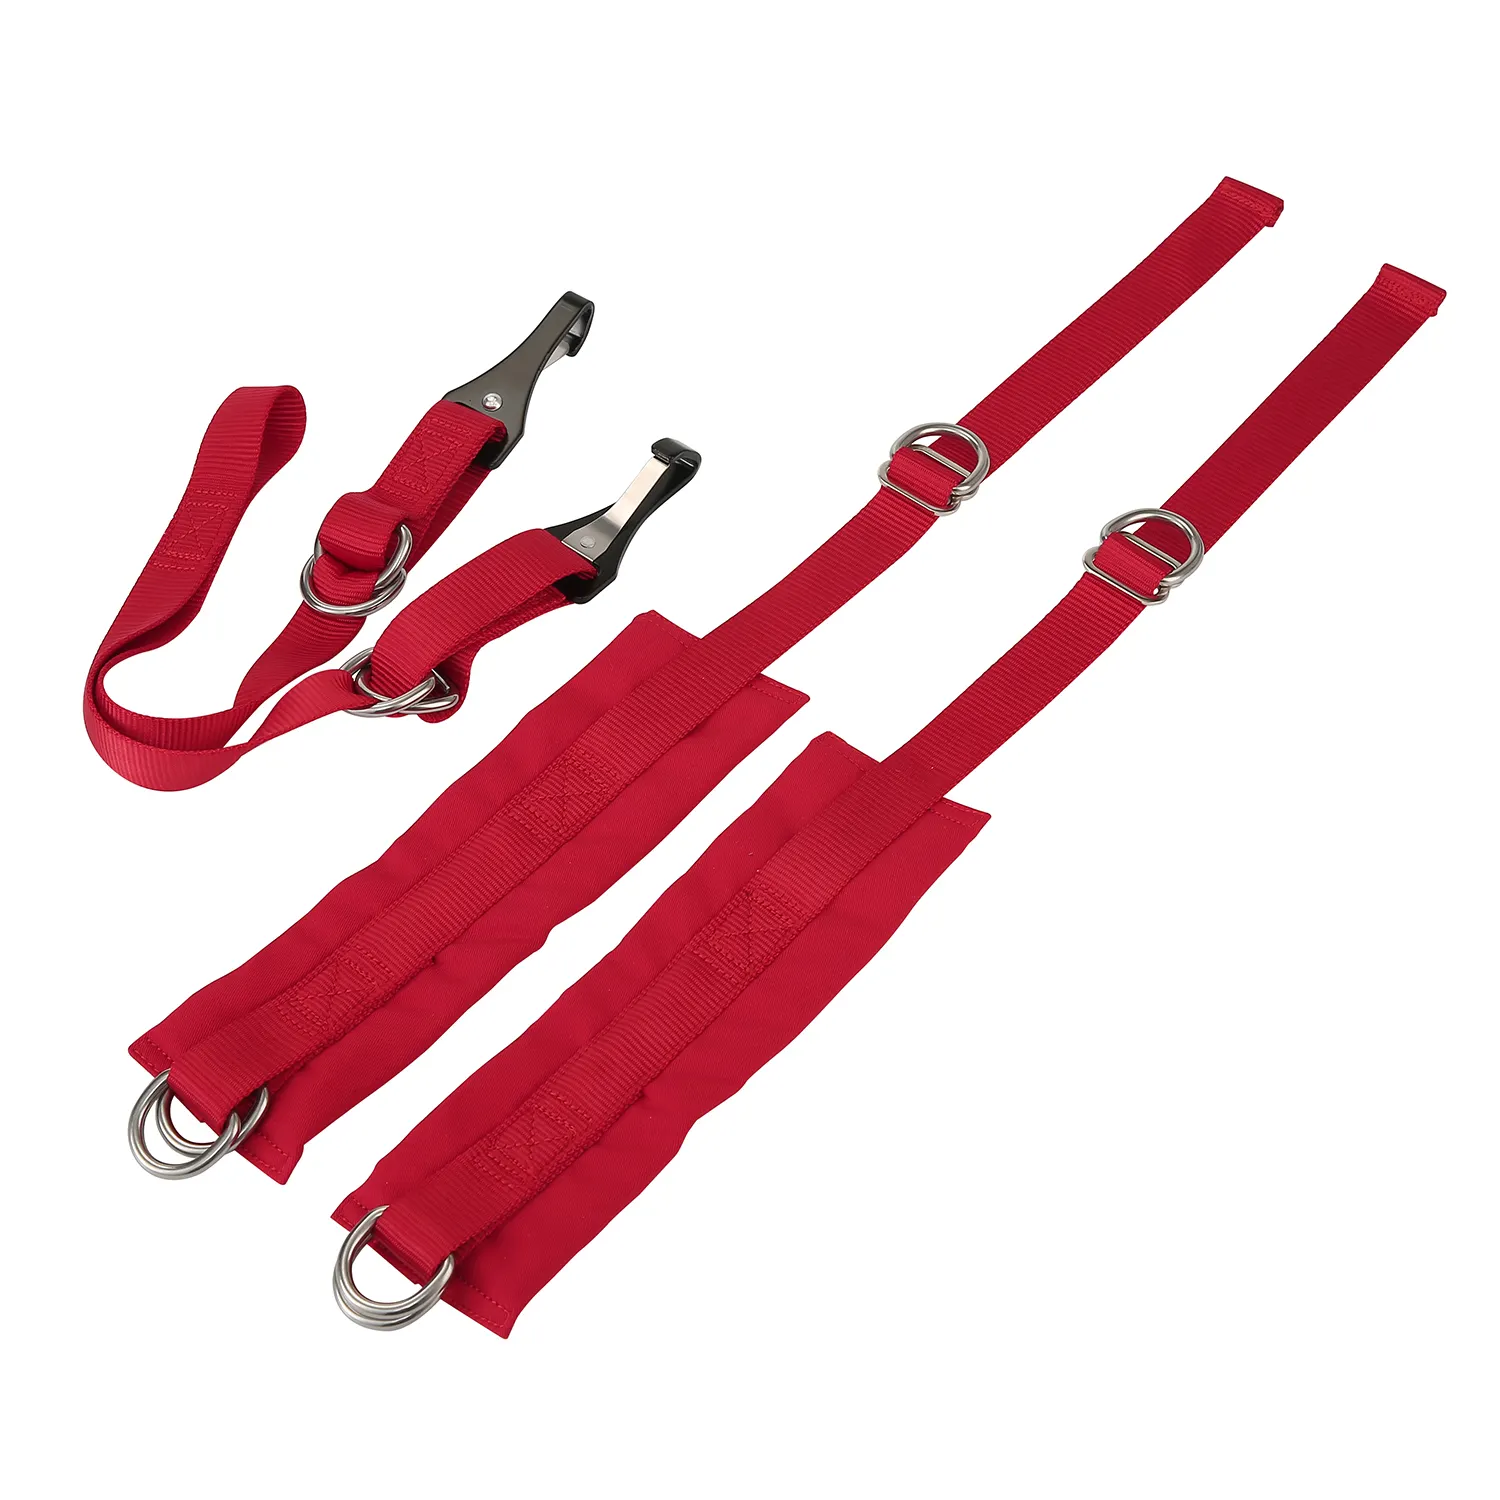 Red Color Universal SFI Racing Car Safety Arm Restraints Safety Gear Accessories